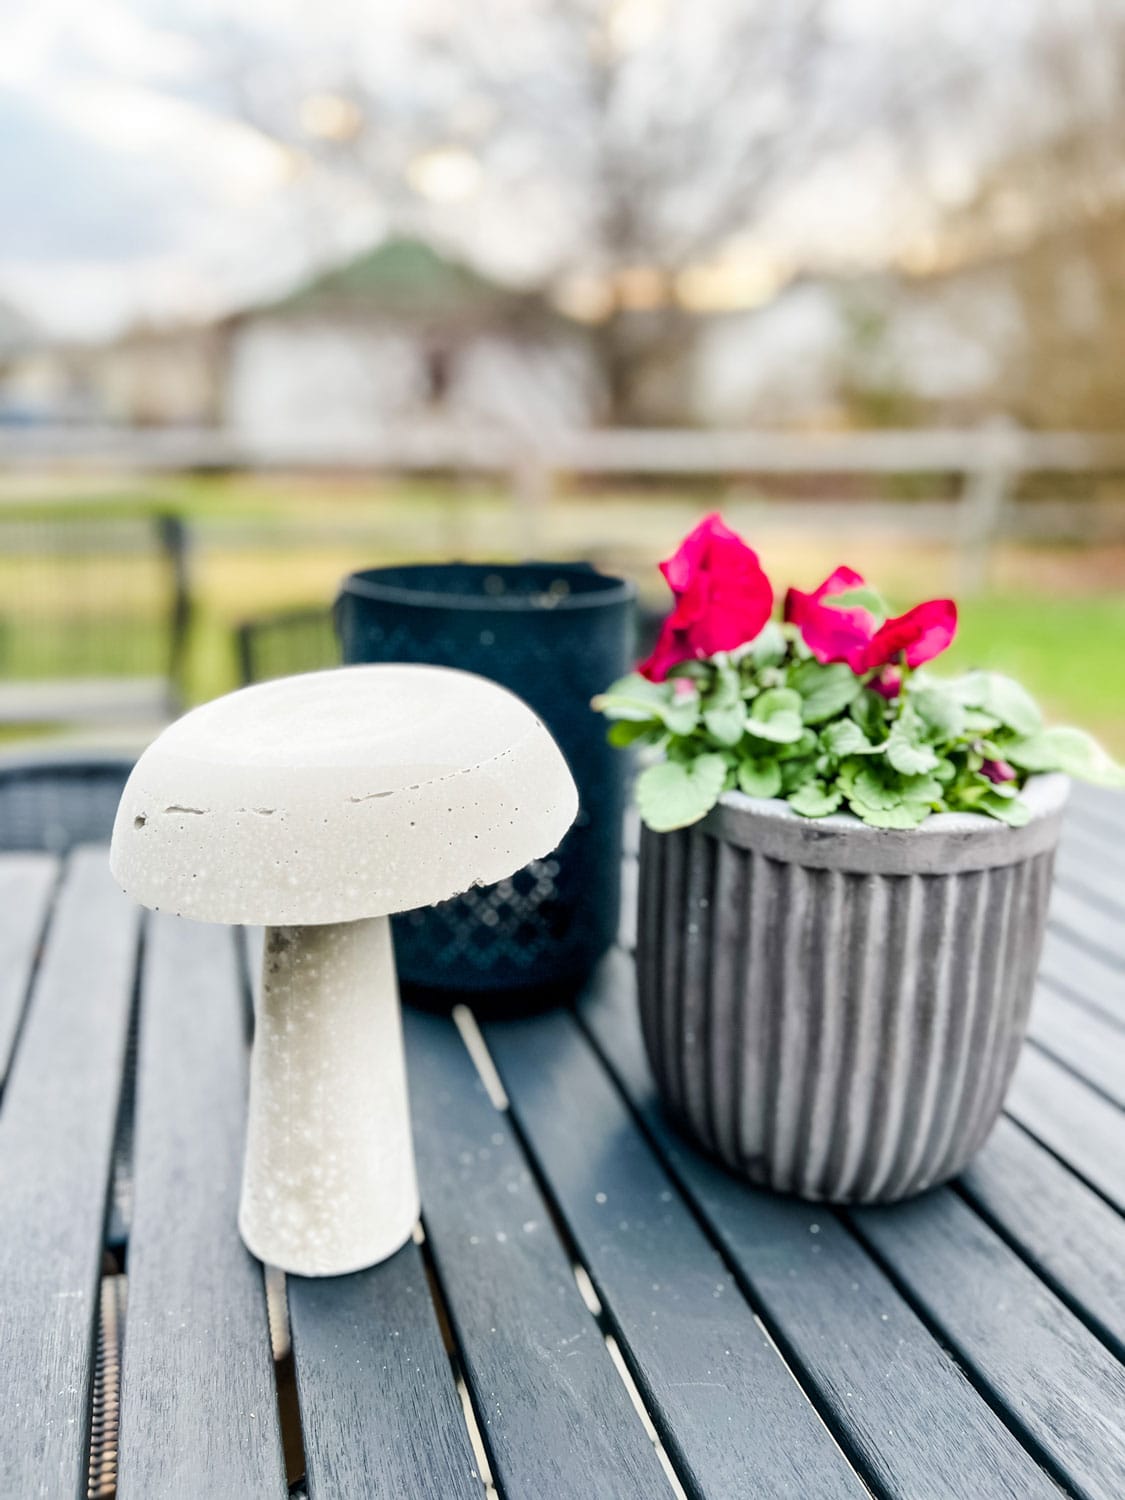 How to make easy cement mushrooms